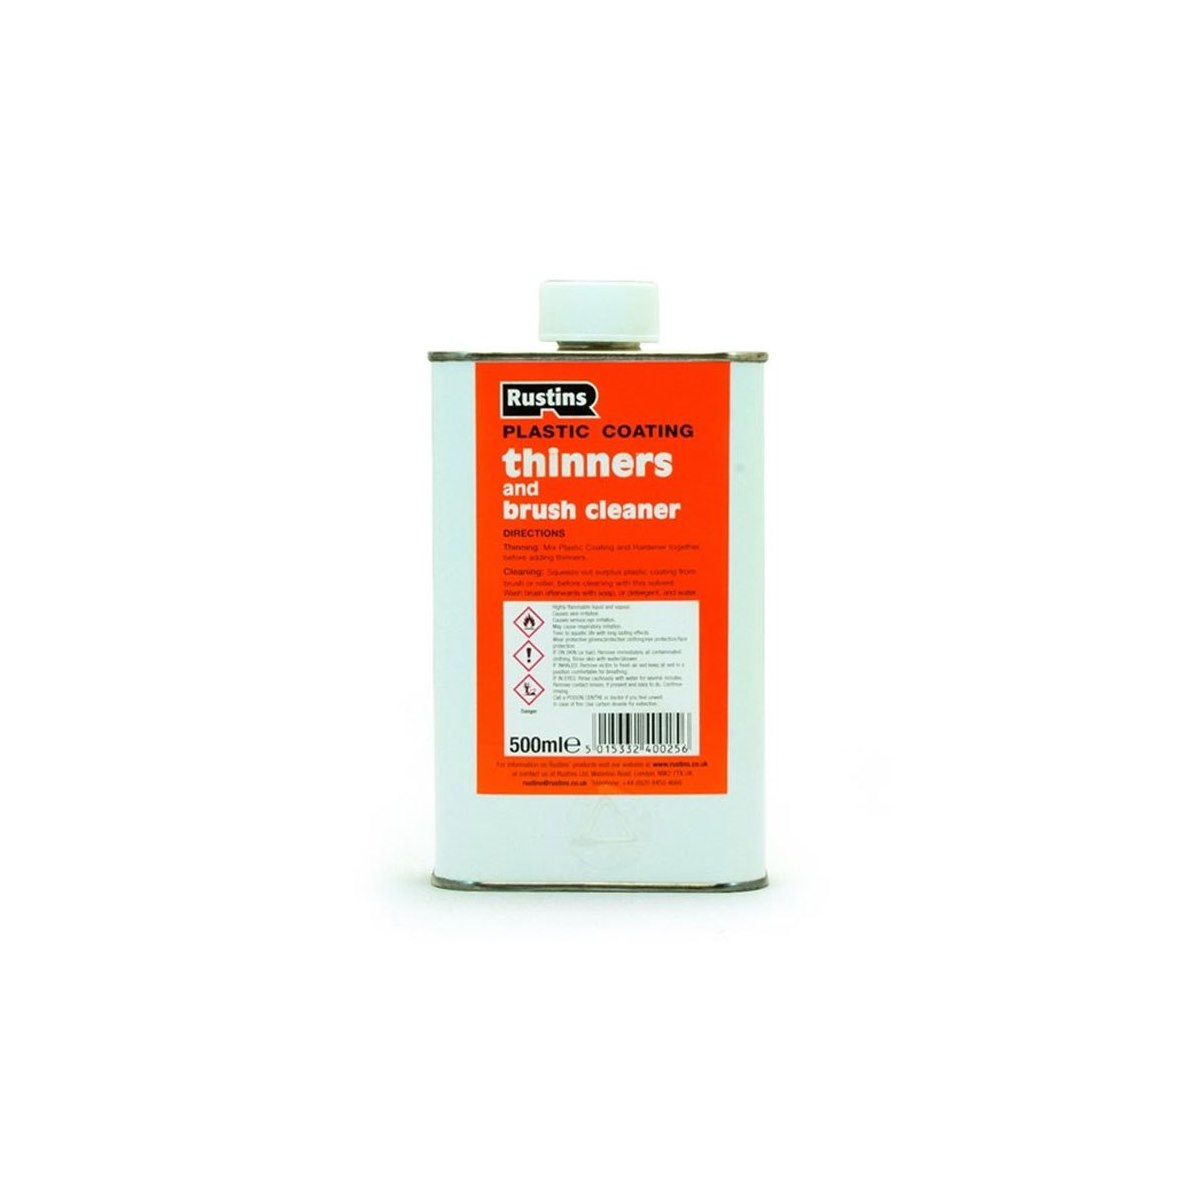 Rustins Plastic Coating Thinners and Brush Cleaner 500ml